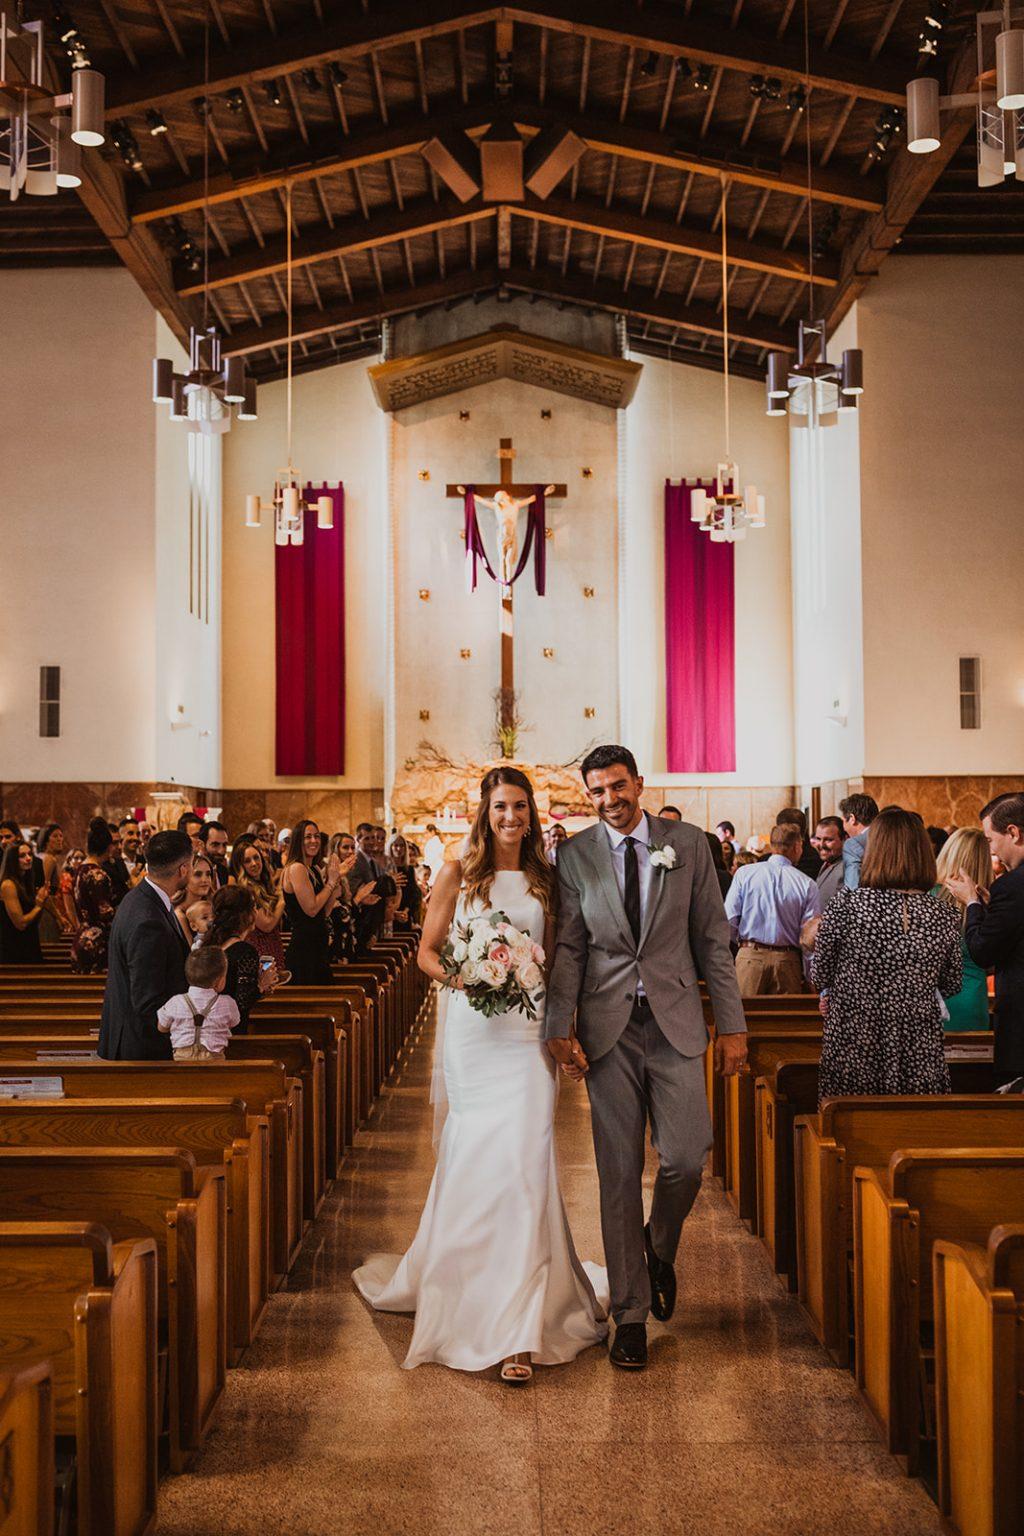 Larsen and her AVP tour pro husband, Bill Kolinske, walk down the aisle at their wedding this year. The two pro players got engaged at center court during a tournament in 2019. Photo courtesy of Kelley Larsen